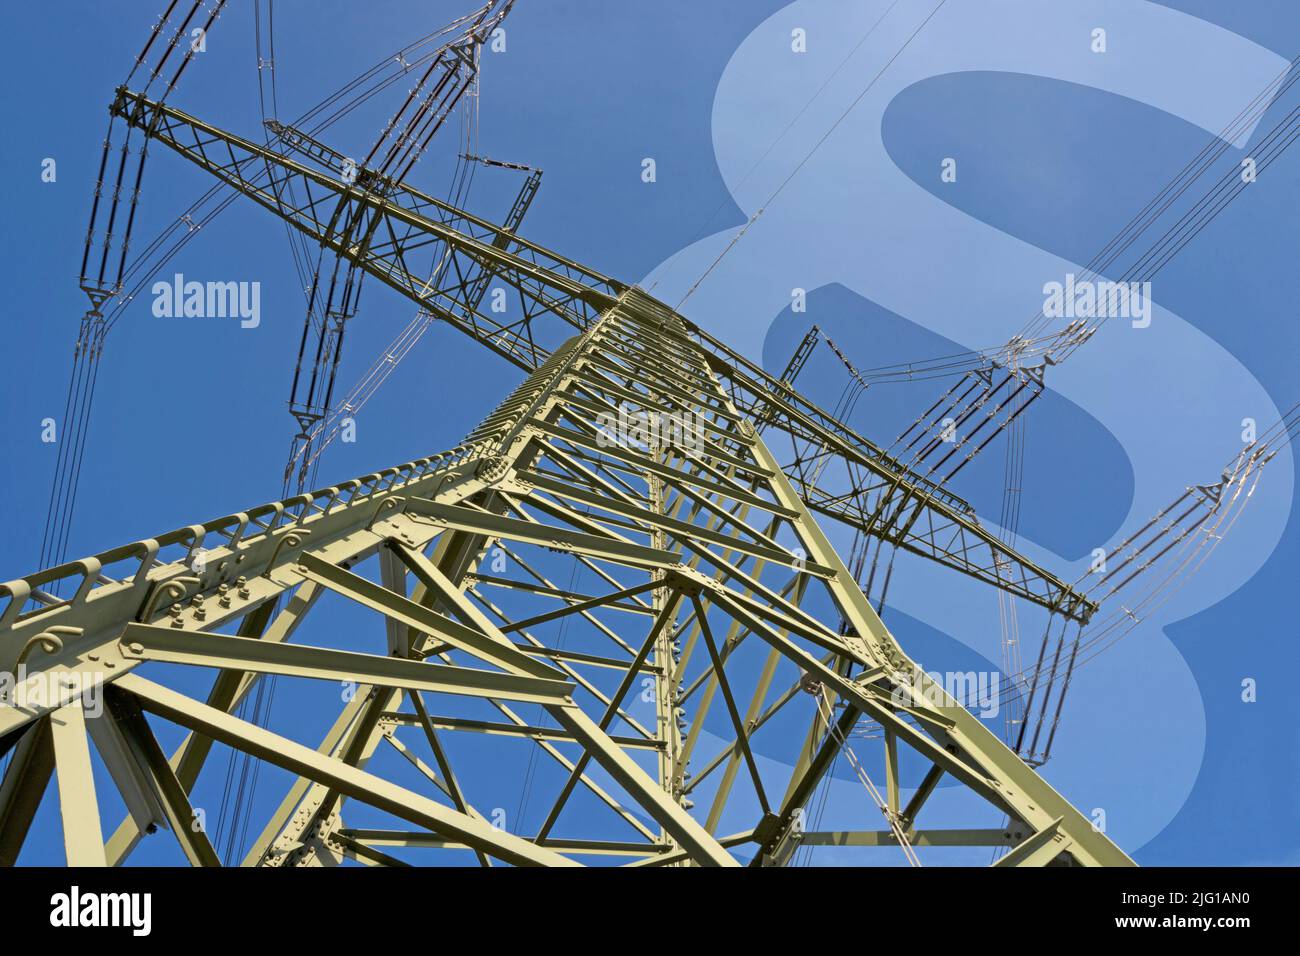 Symbolic image on the topic of the electricity market and law Stock Photo